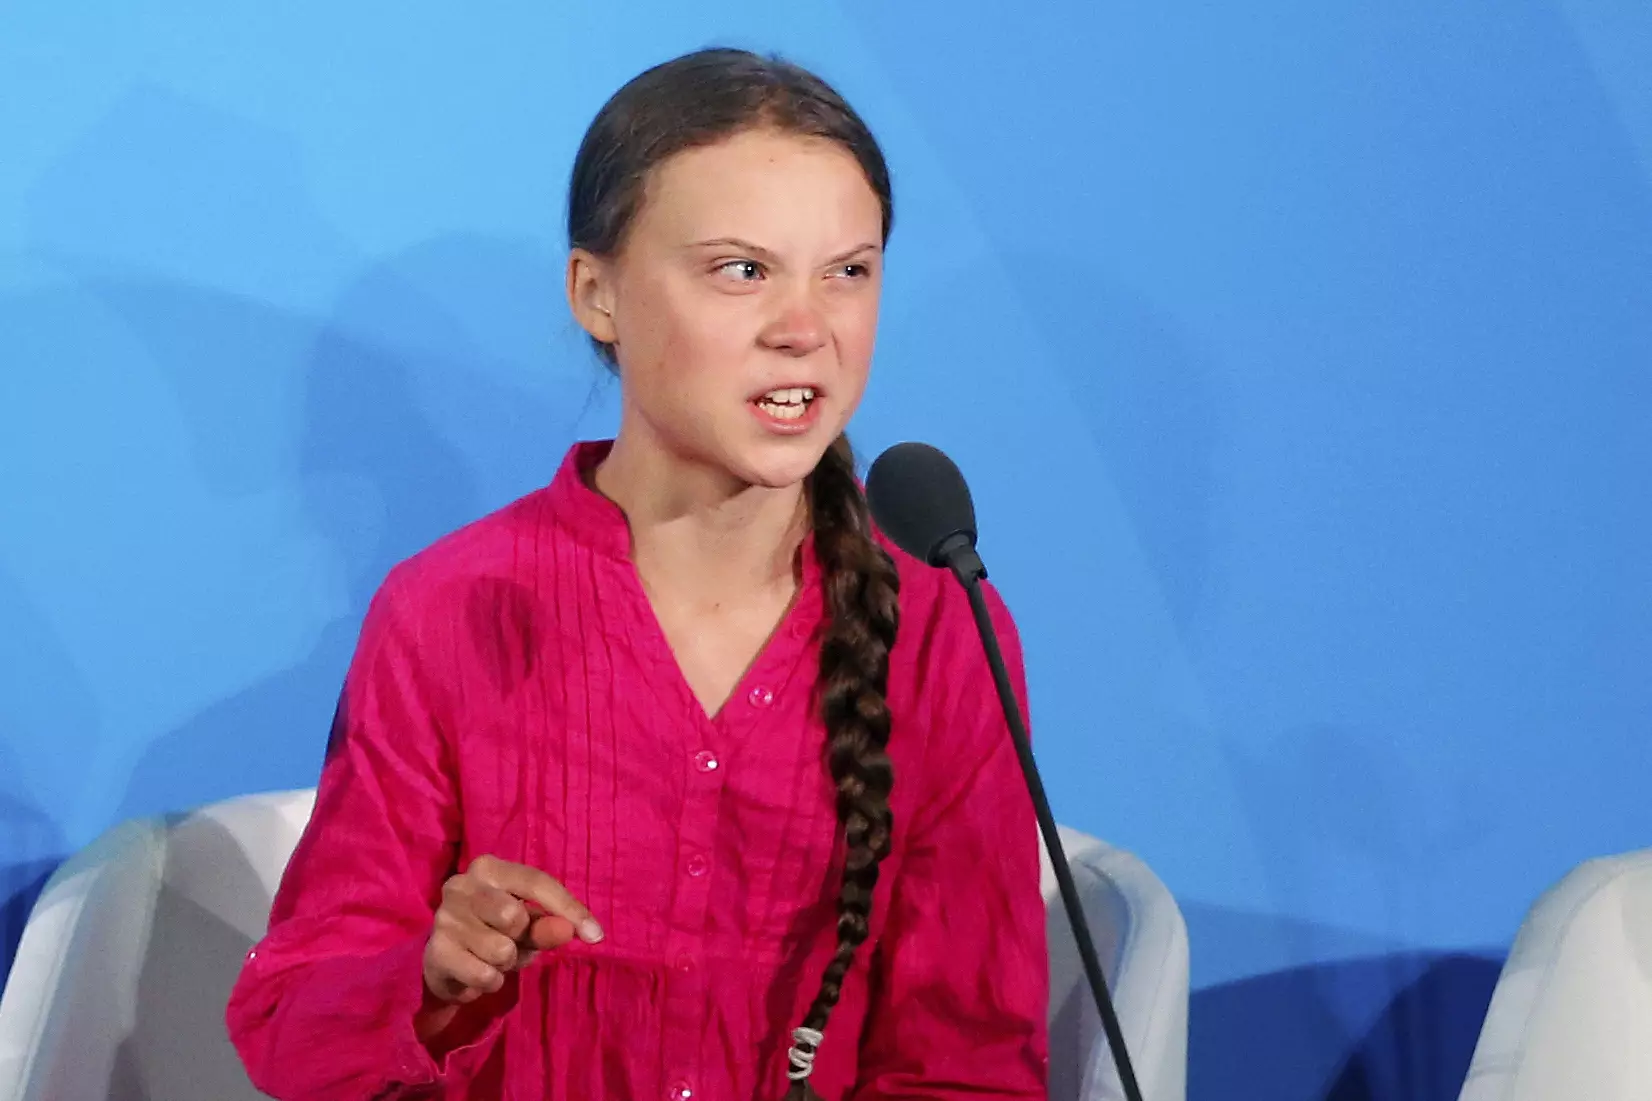 The teen addressed the UN, where she criticised politicians for their lack of action.